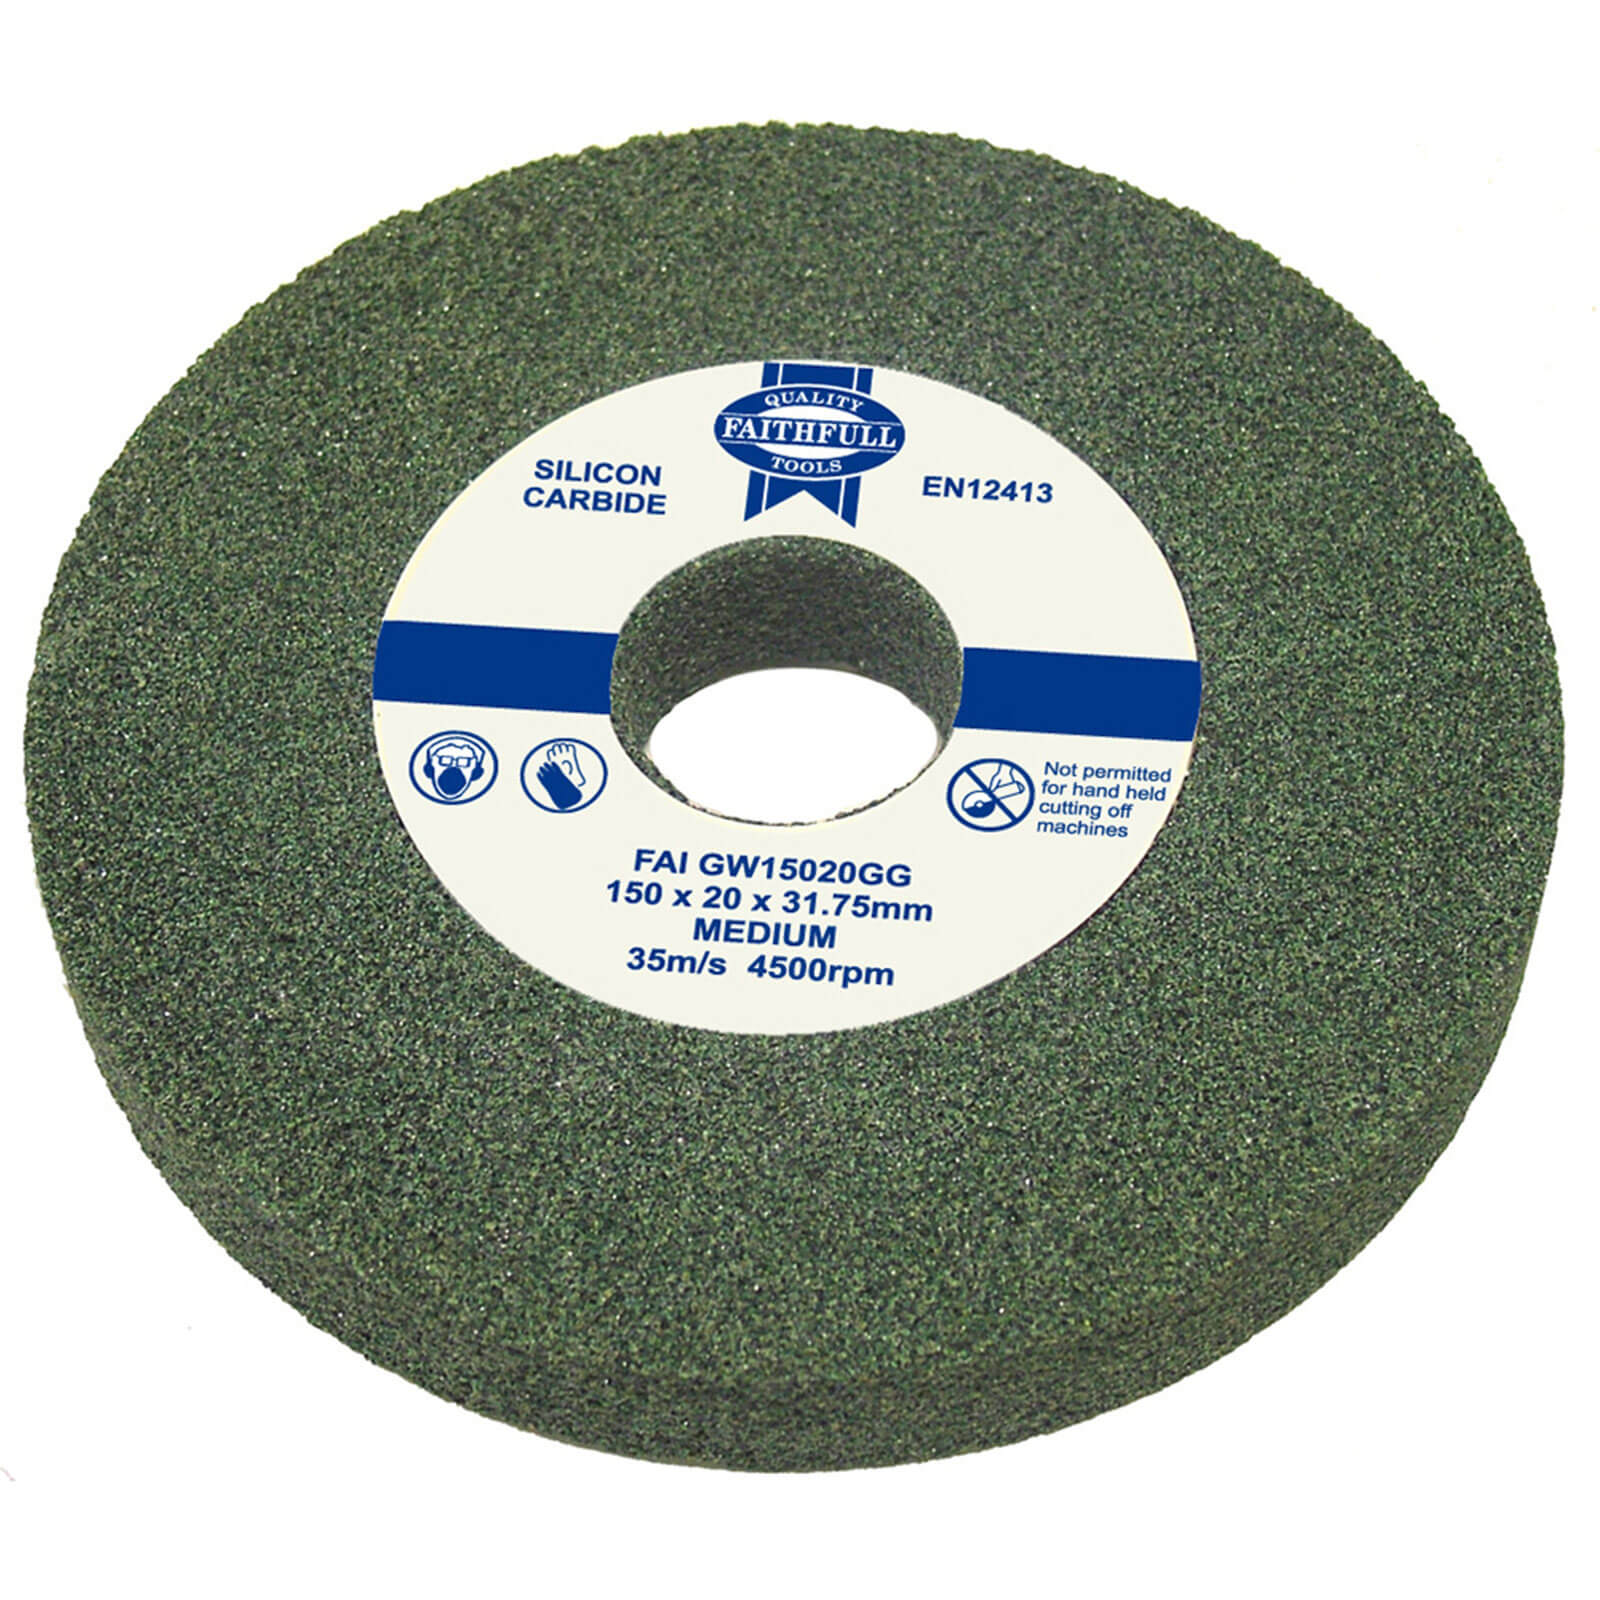 Photo of Faithfull Green Silicone Carbide Grinding Wheel 150mm 16mm Fine